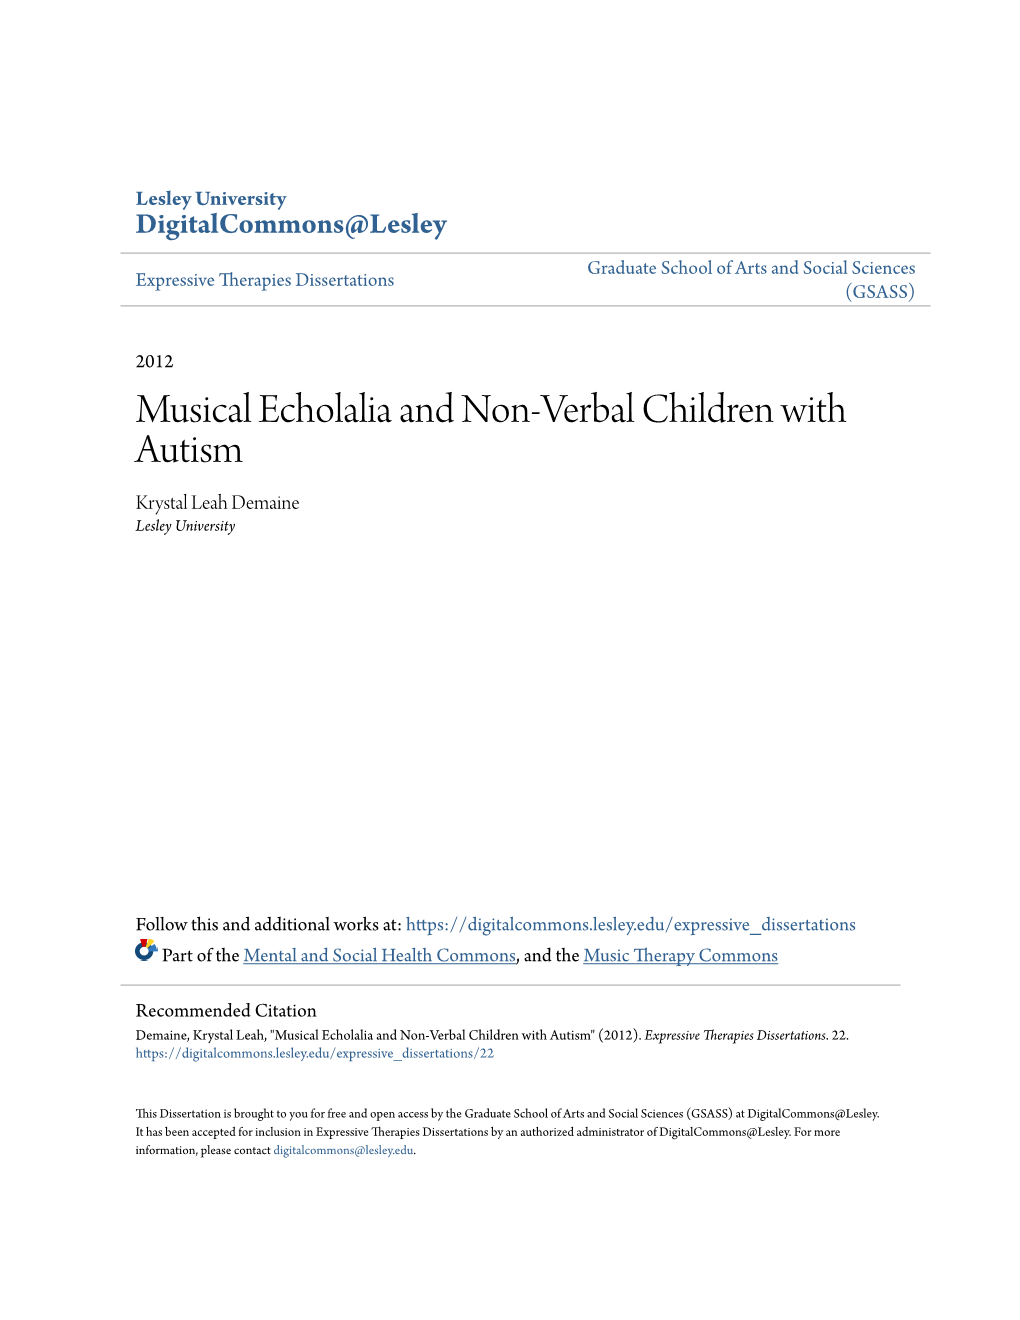 Musical Echolalia and Non-Verbal Children with Autism Krystal Leah Demaine Lesley University